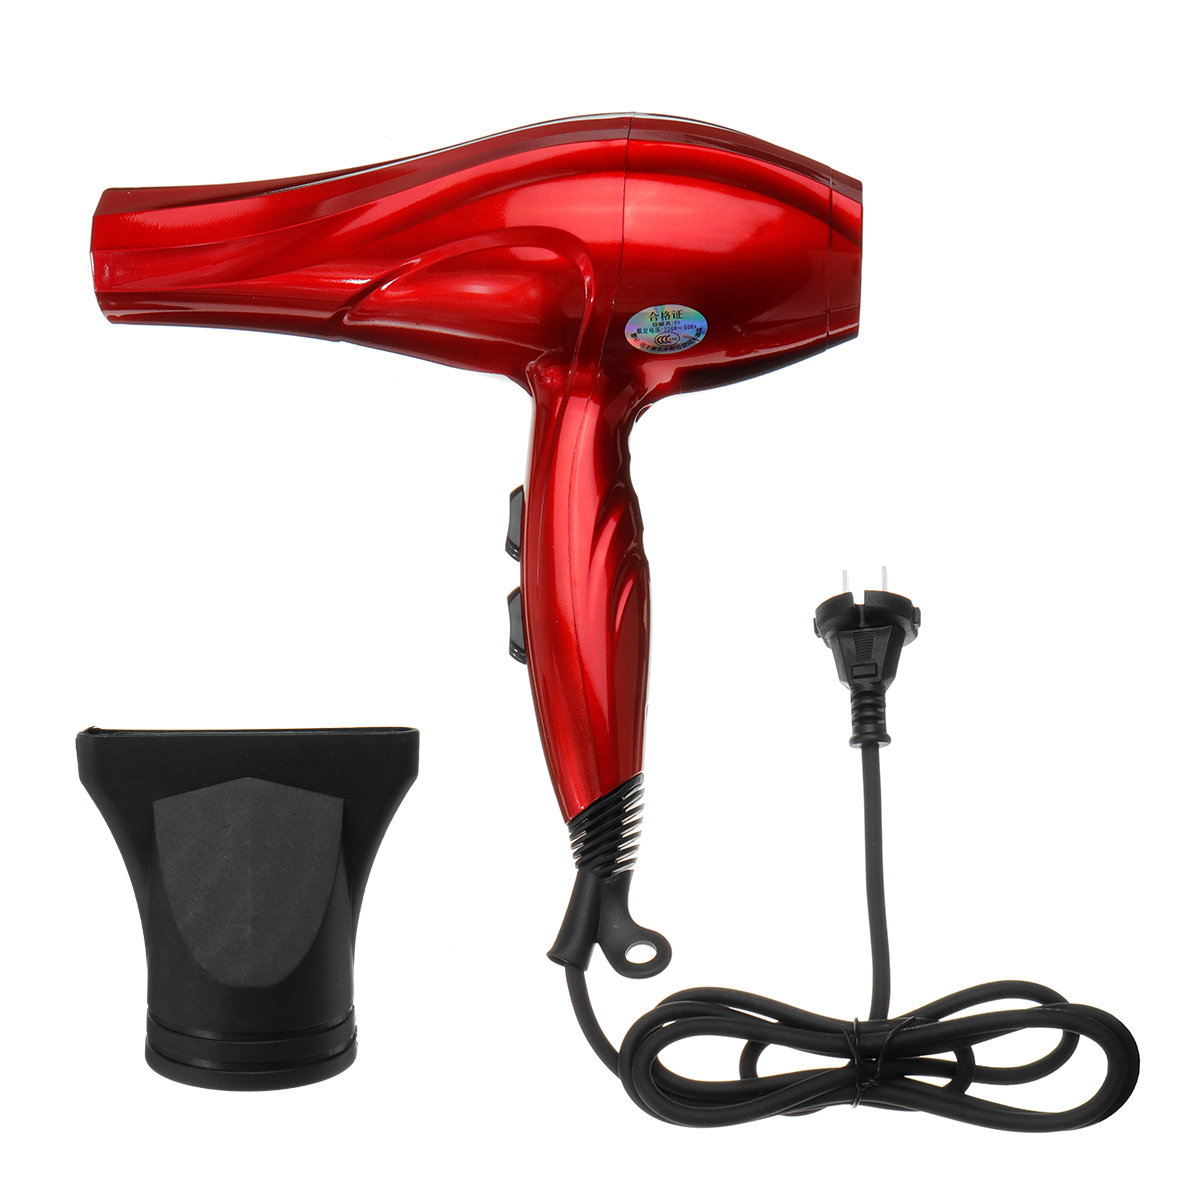 

3000W Professional Hair Blow Dryer Blower Diffuser Salon Styling with Nozzles